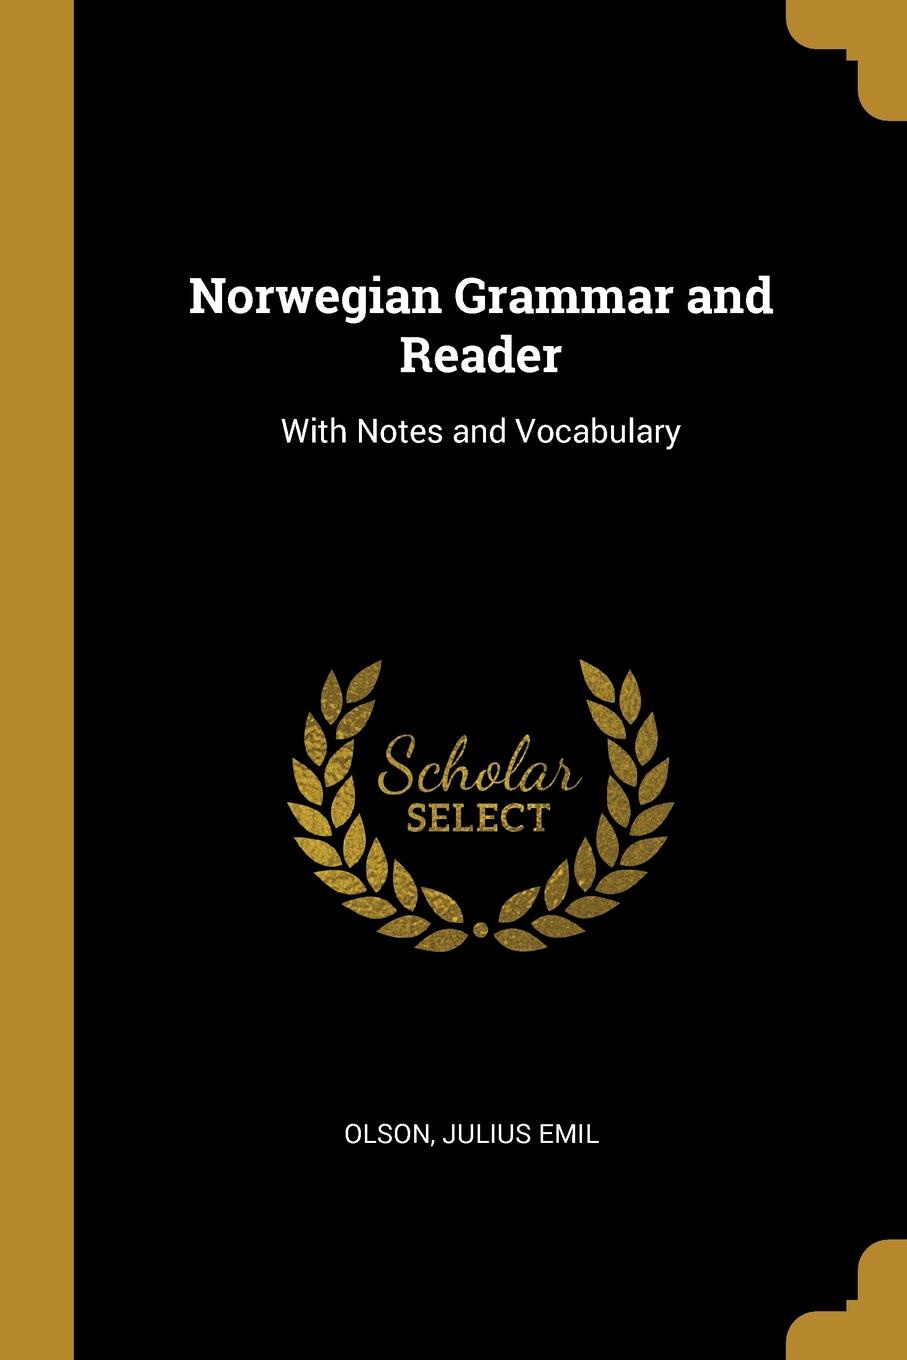 Norwegian Grammar and Reader. With Notes and Vocabulary